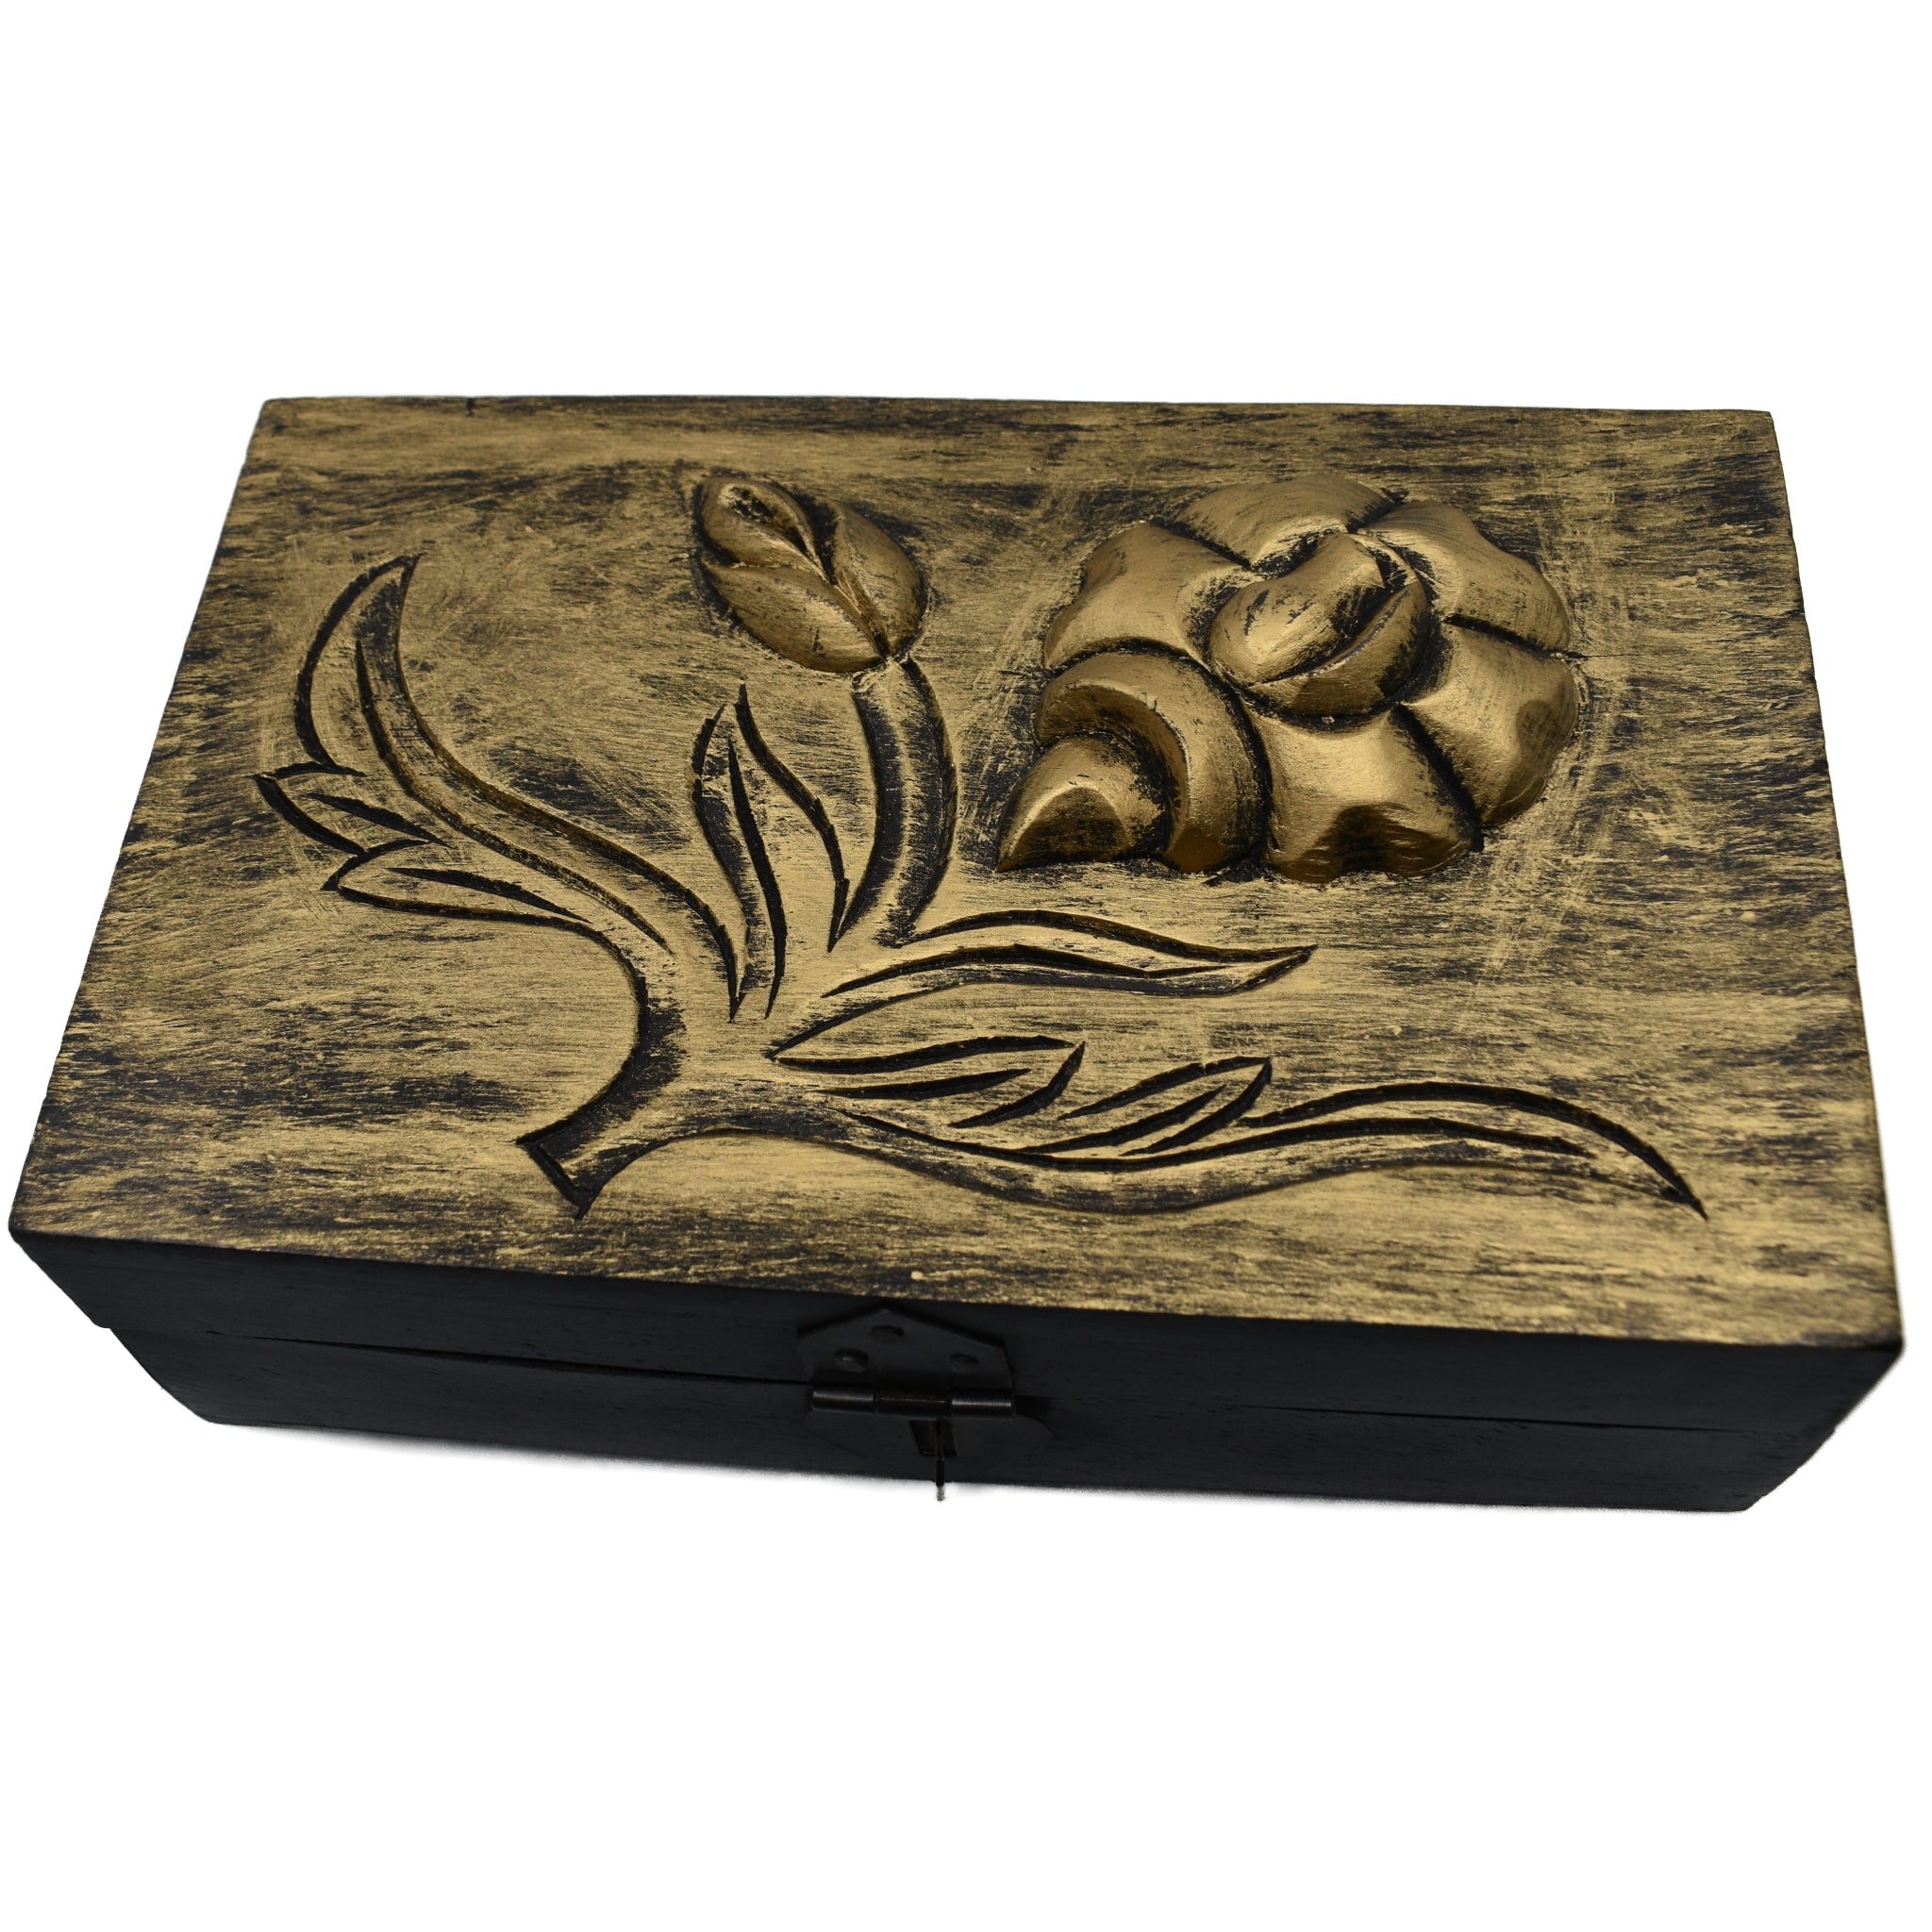 Wooden box with antique gold paint, carved rose mela coast on front 